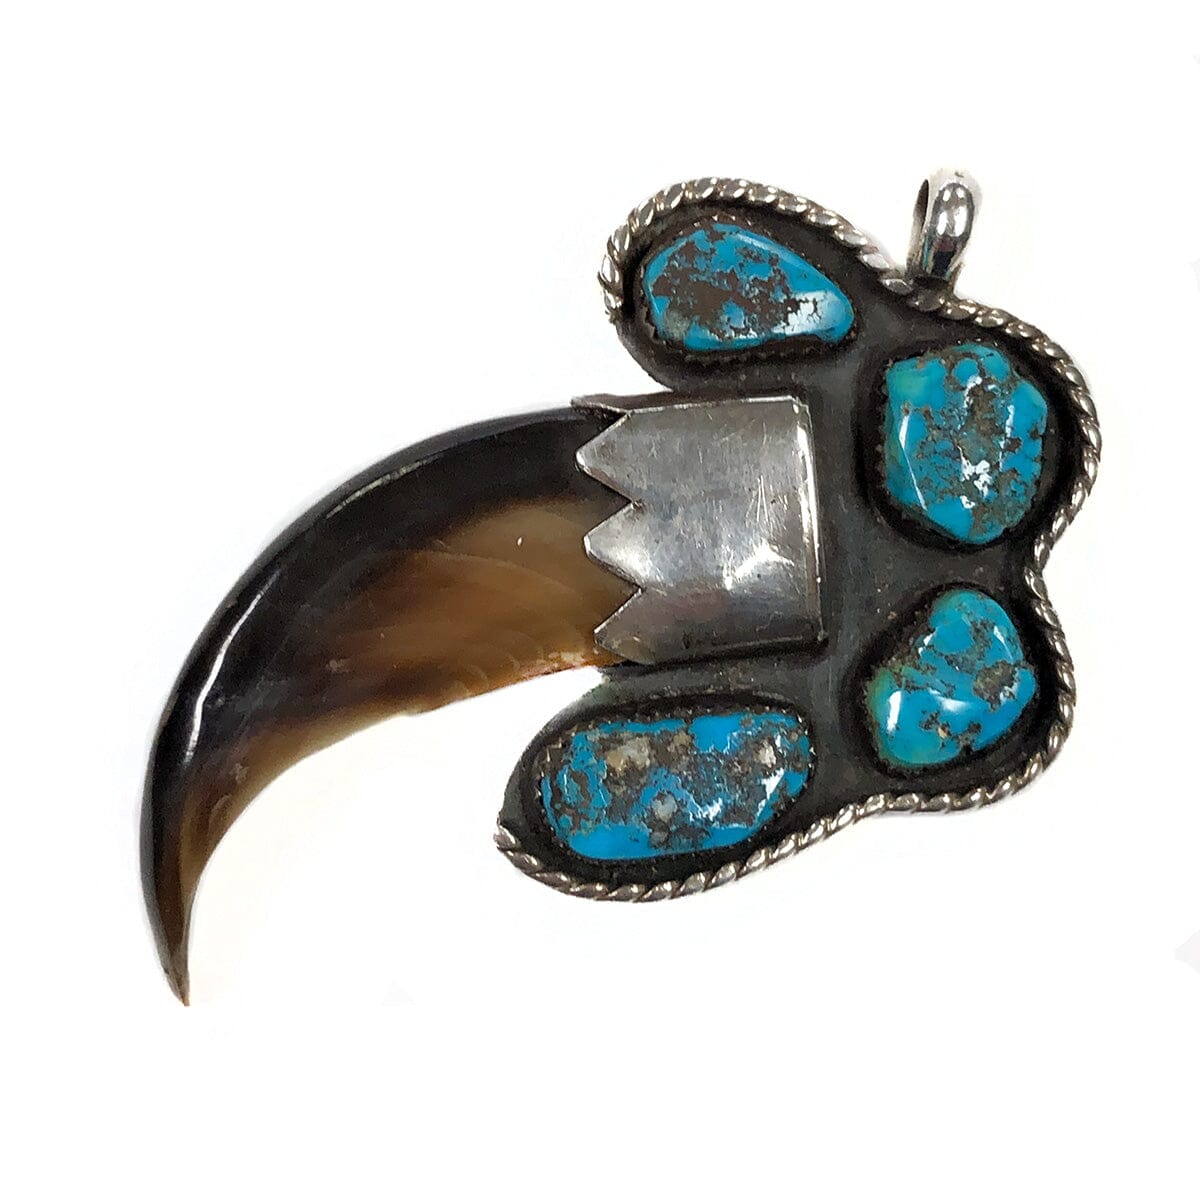 Bear claw necklace with silver and coral beads and bezel-set cabochon  turquoise stones / Woody Max Crumbo - Gilcrease Museum